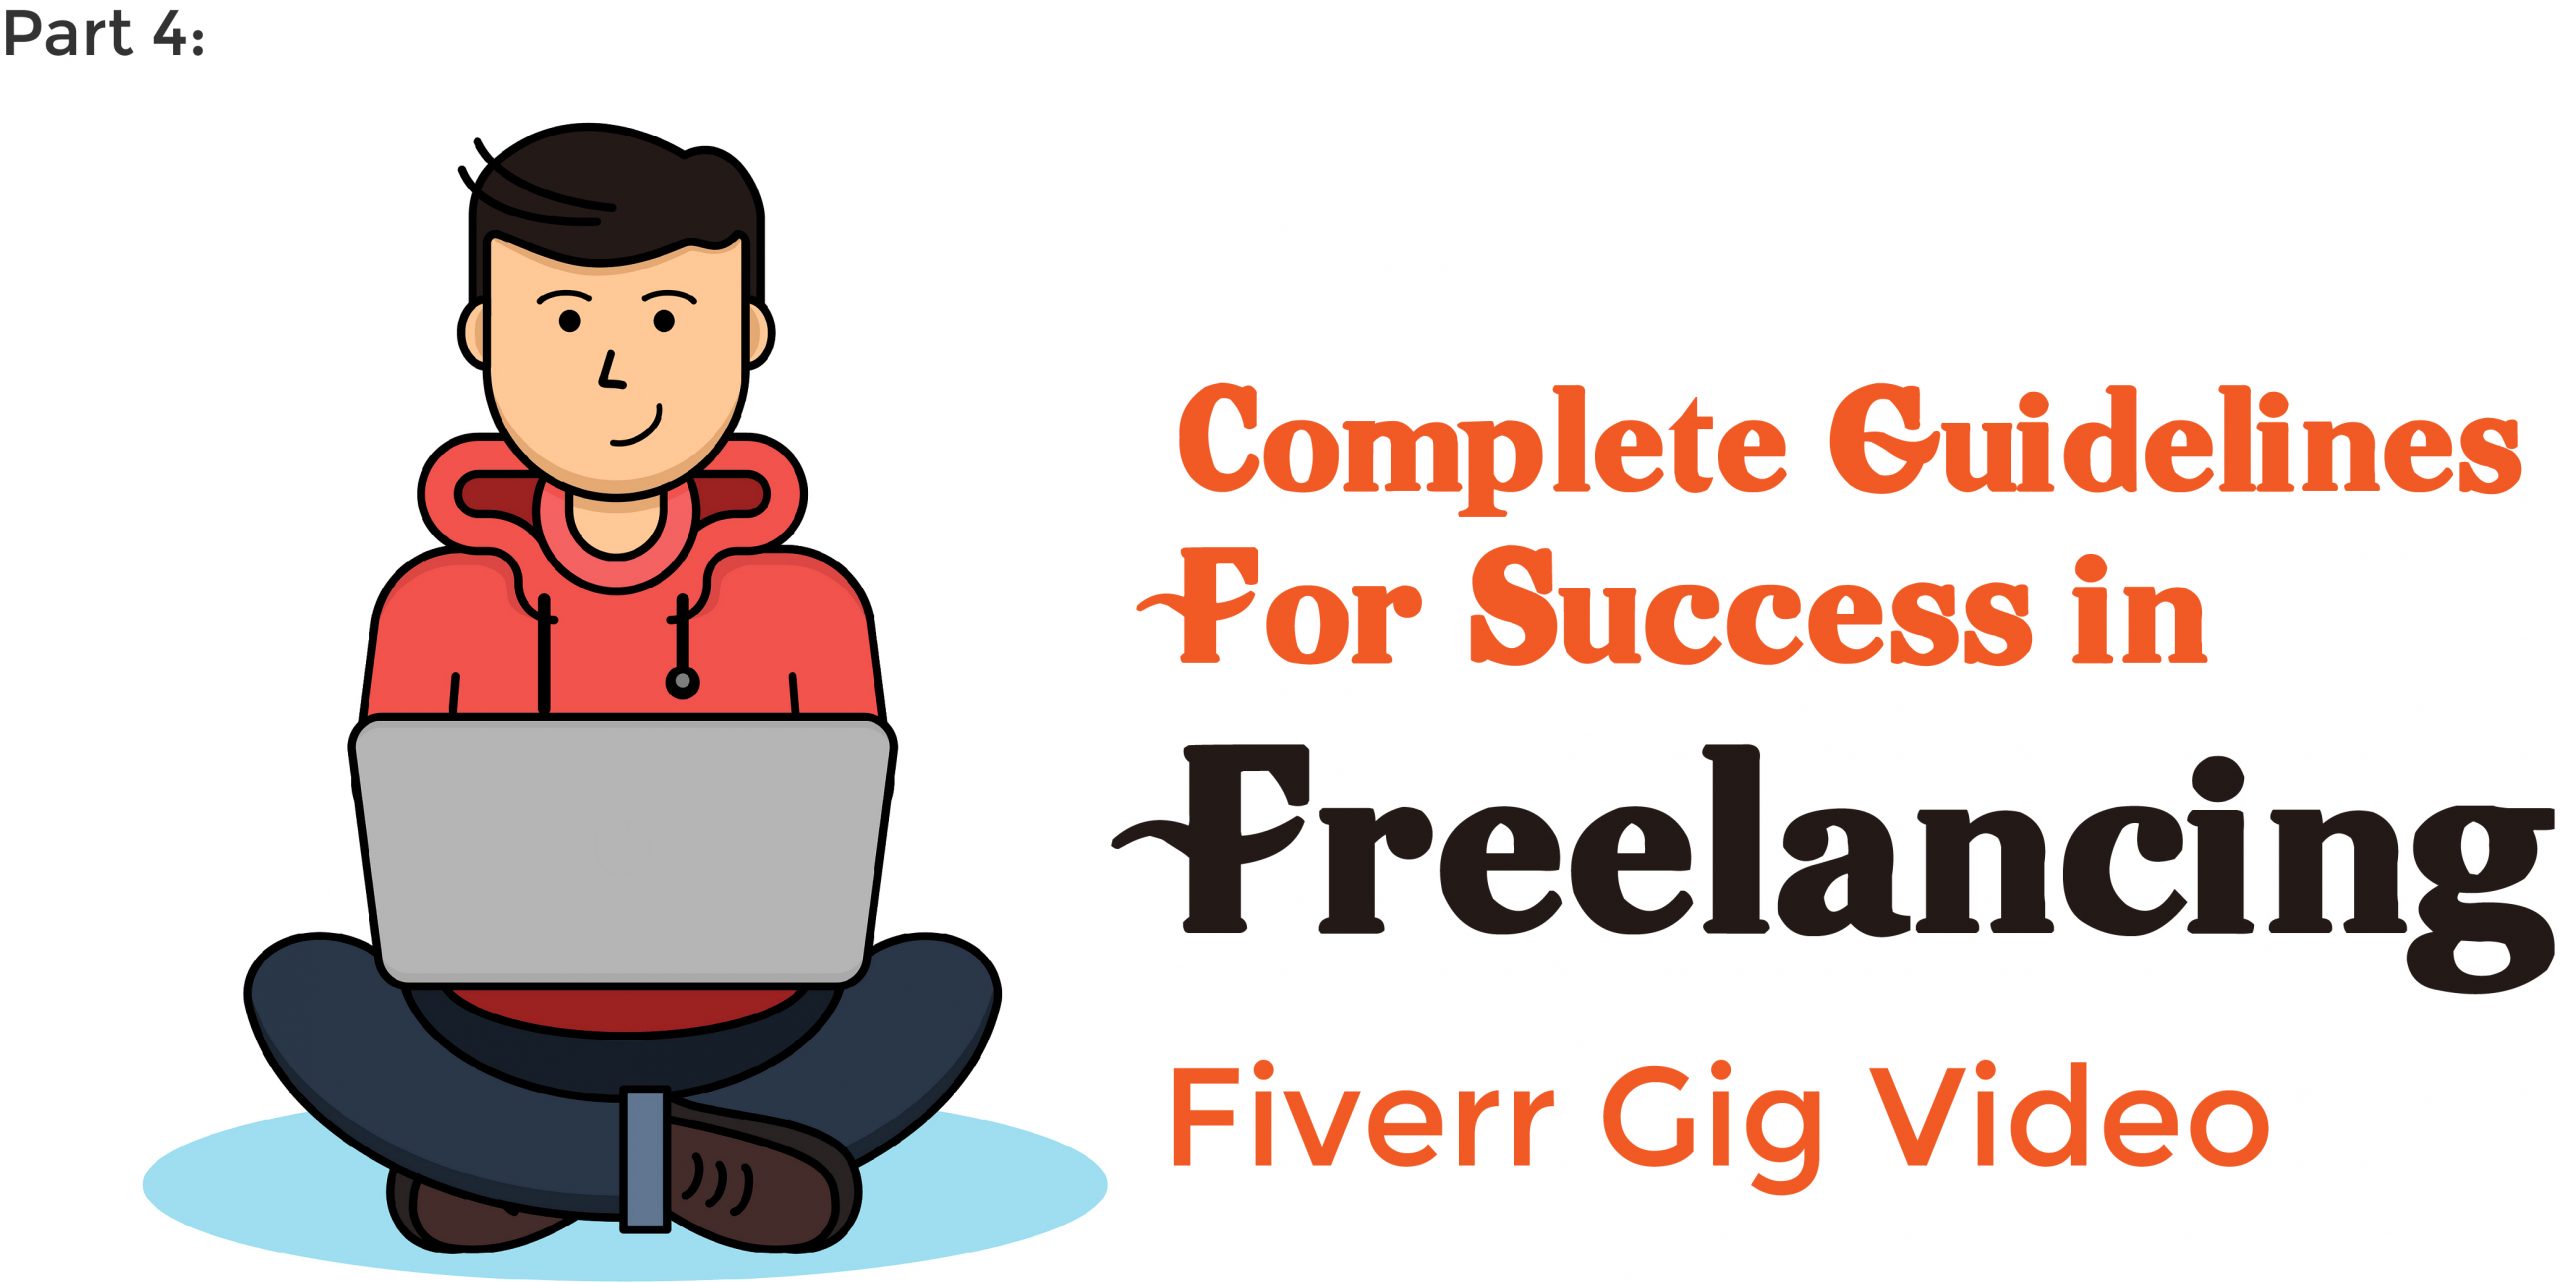 Complete guidelines for success in freelancing - Fiverr Gig Video